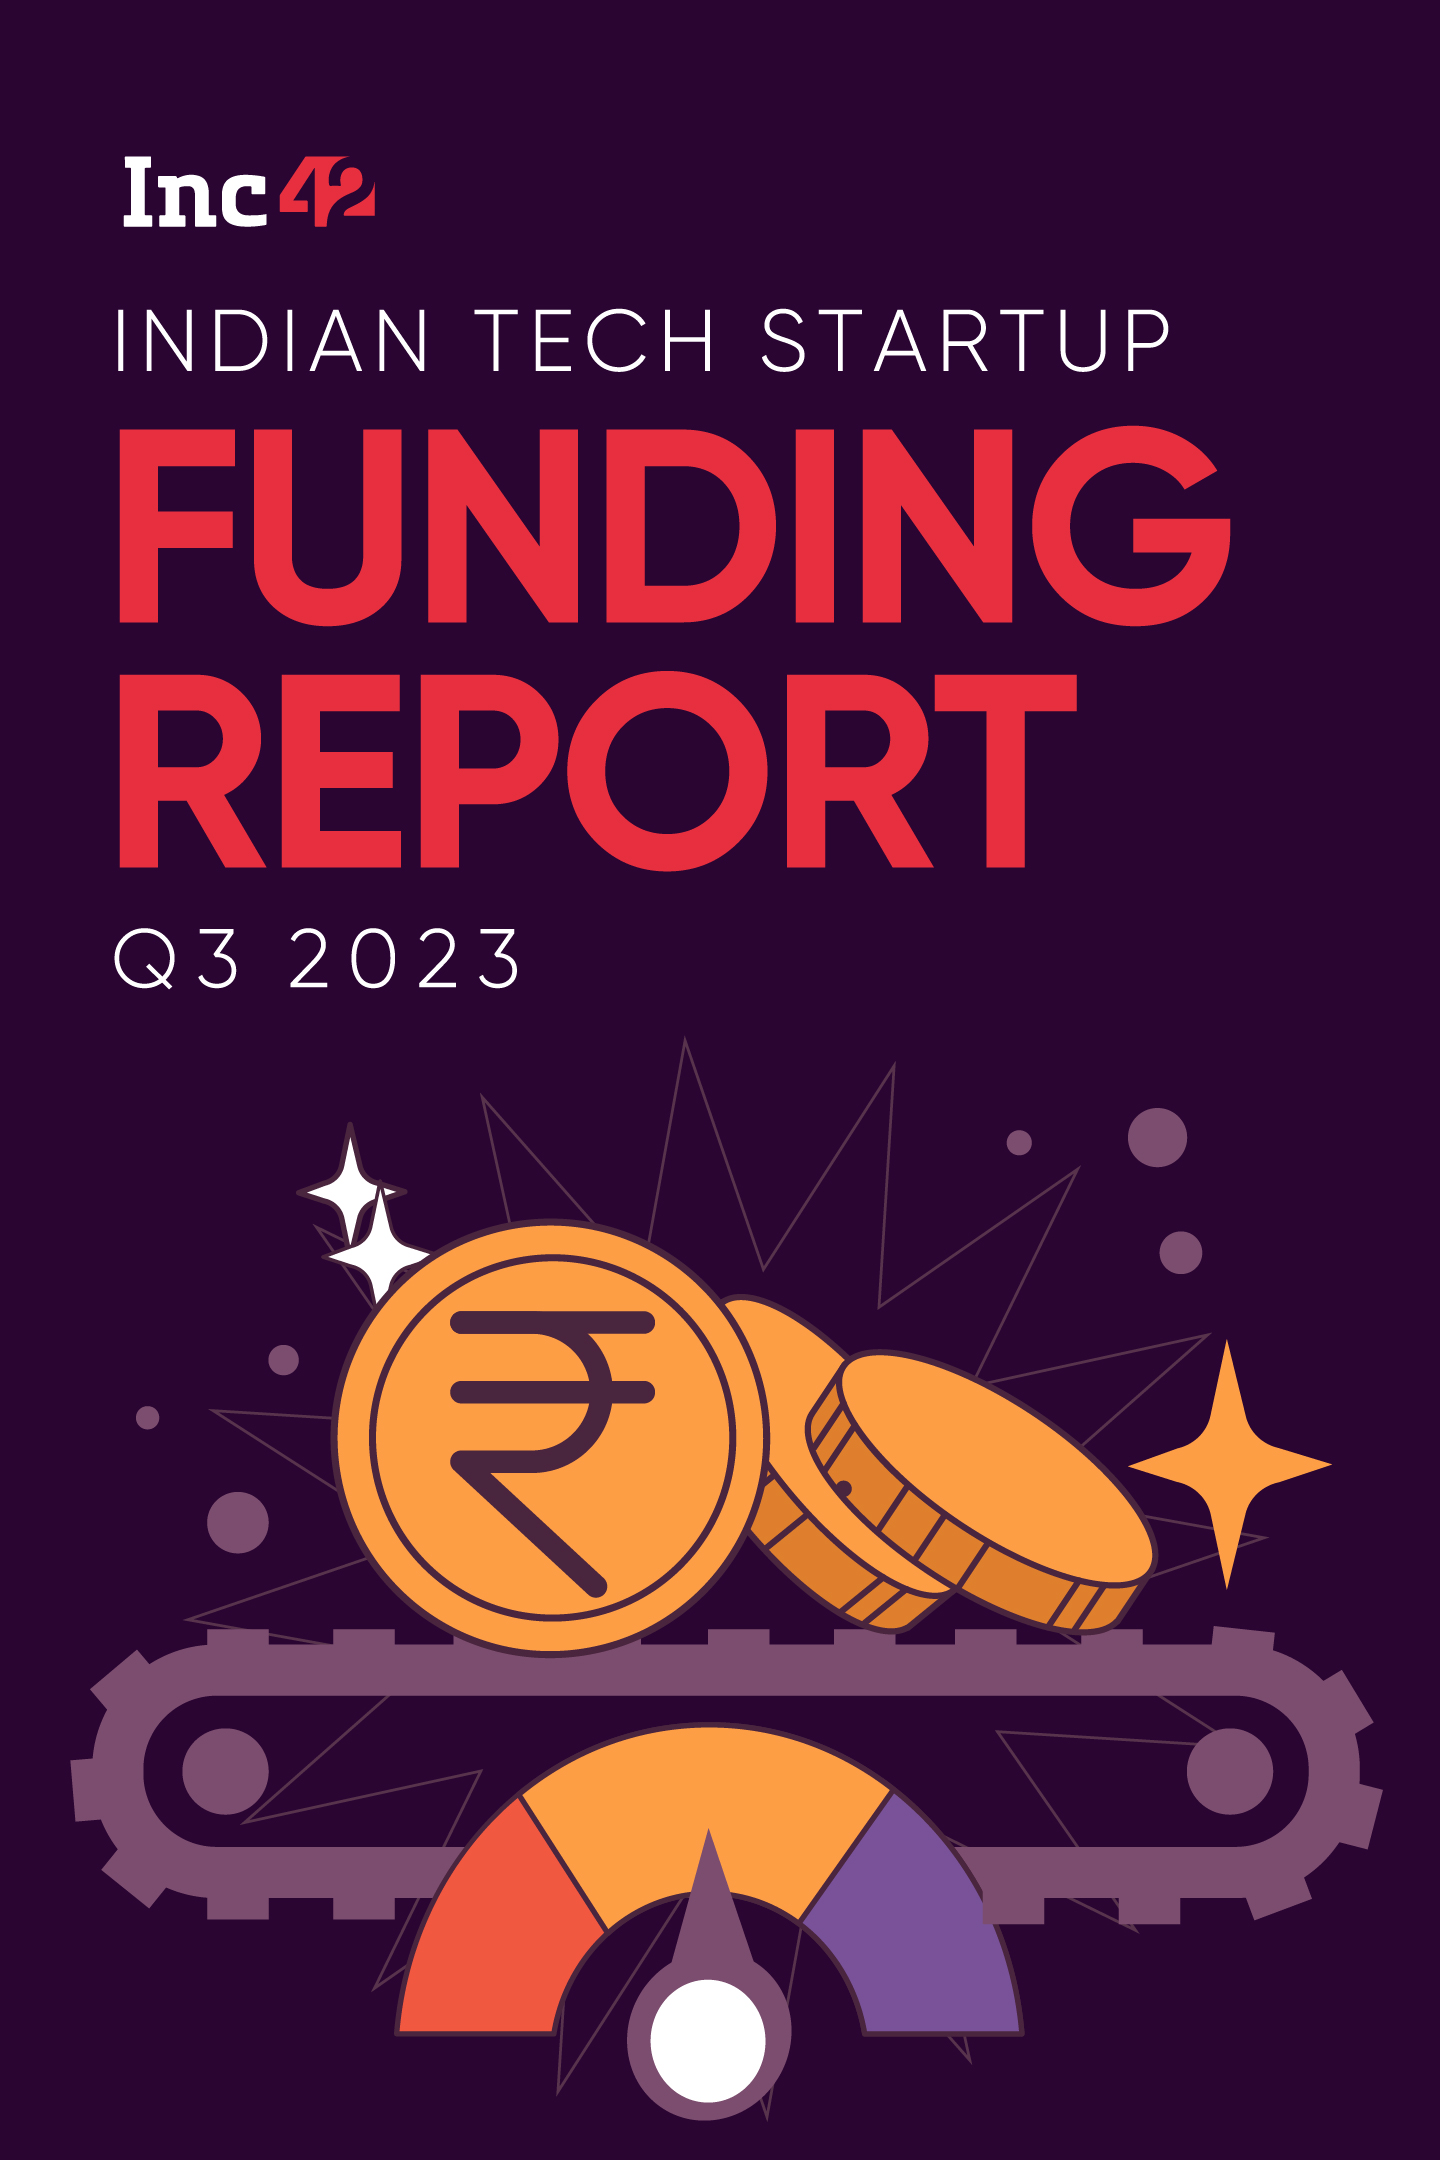 Indian Tech Startup Funding Report Q3 2023